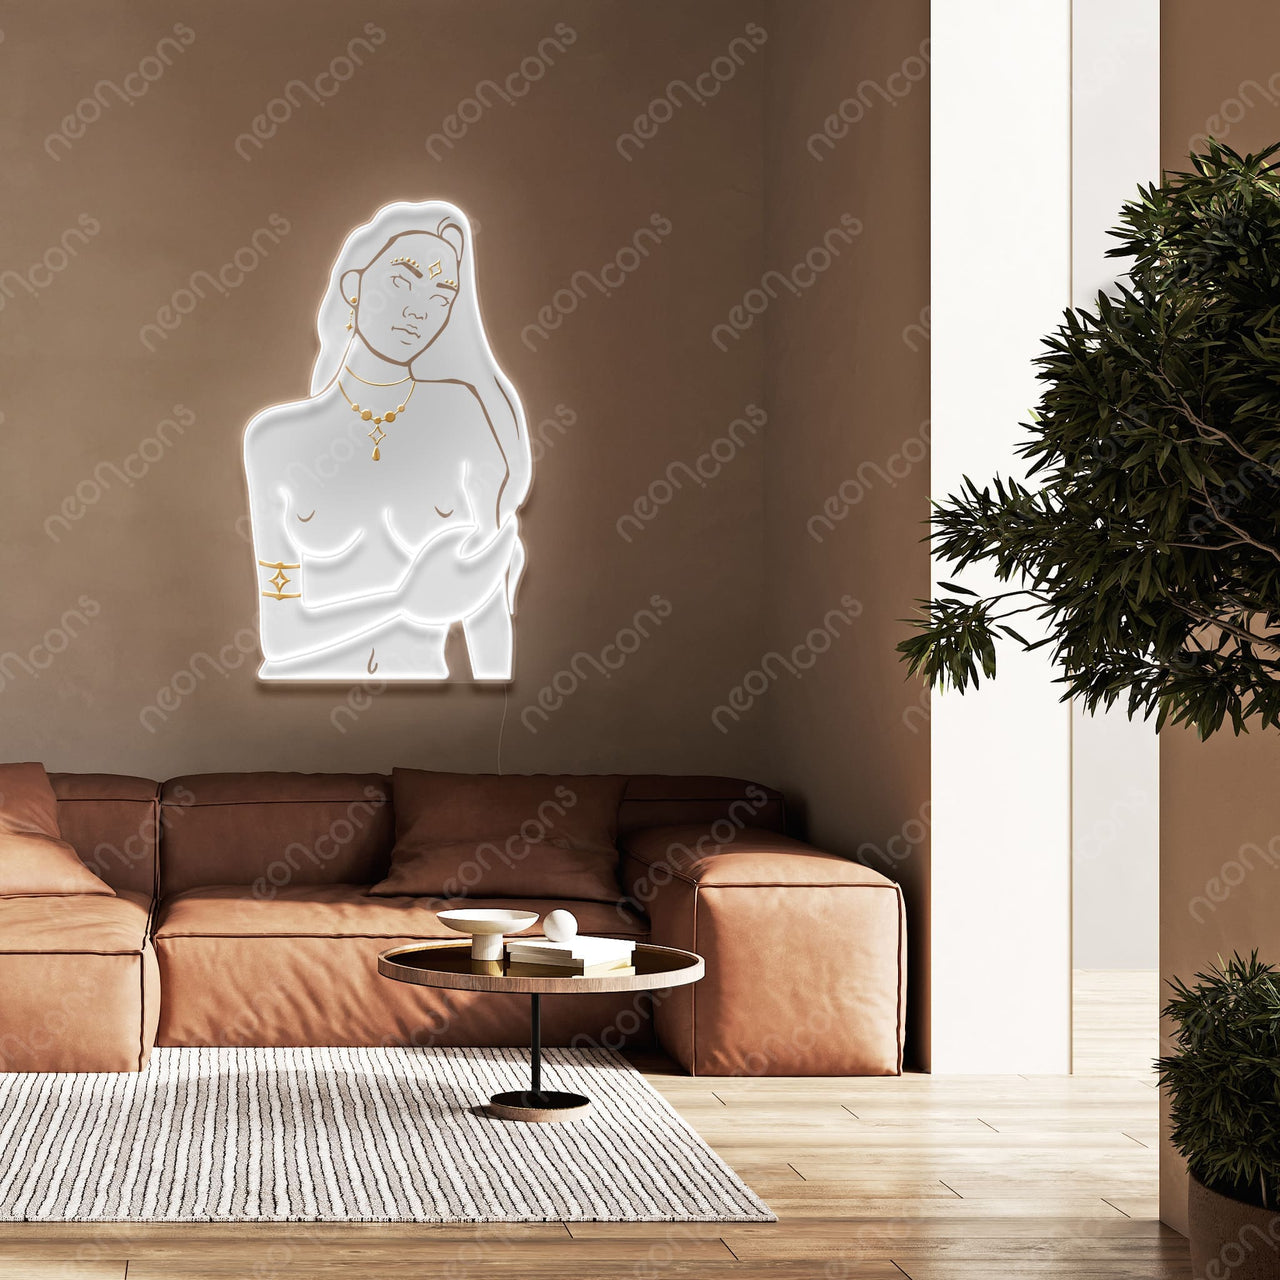 "Cancer Goddess" LED Neon x Print x Reflective Acrylic by Neon Icons